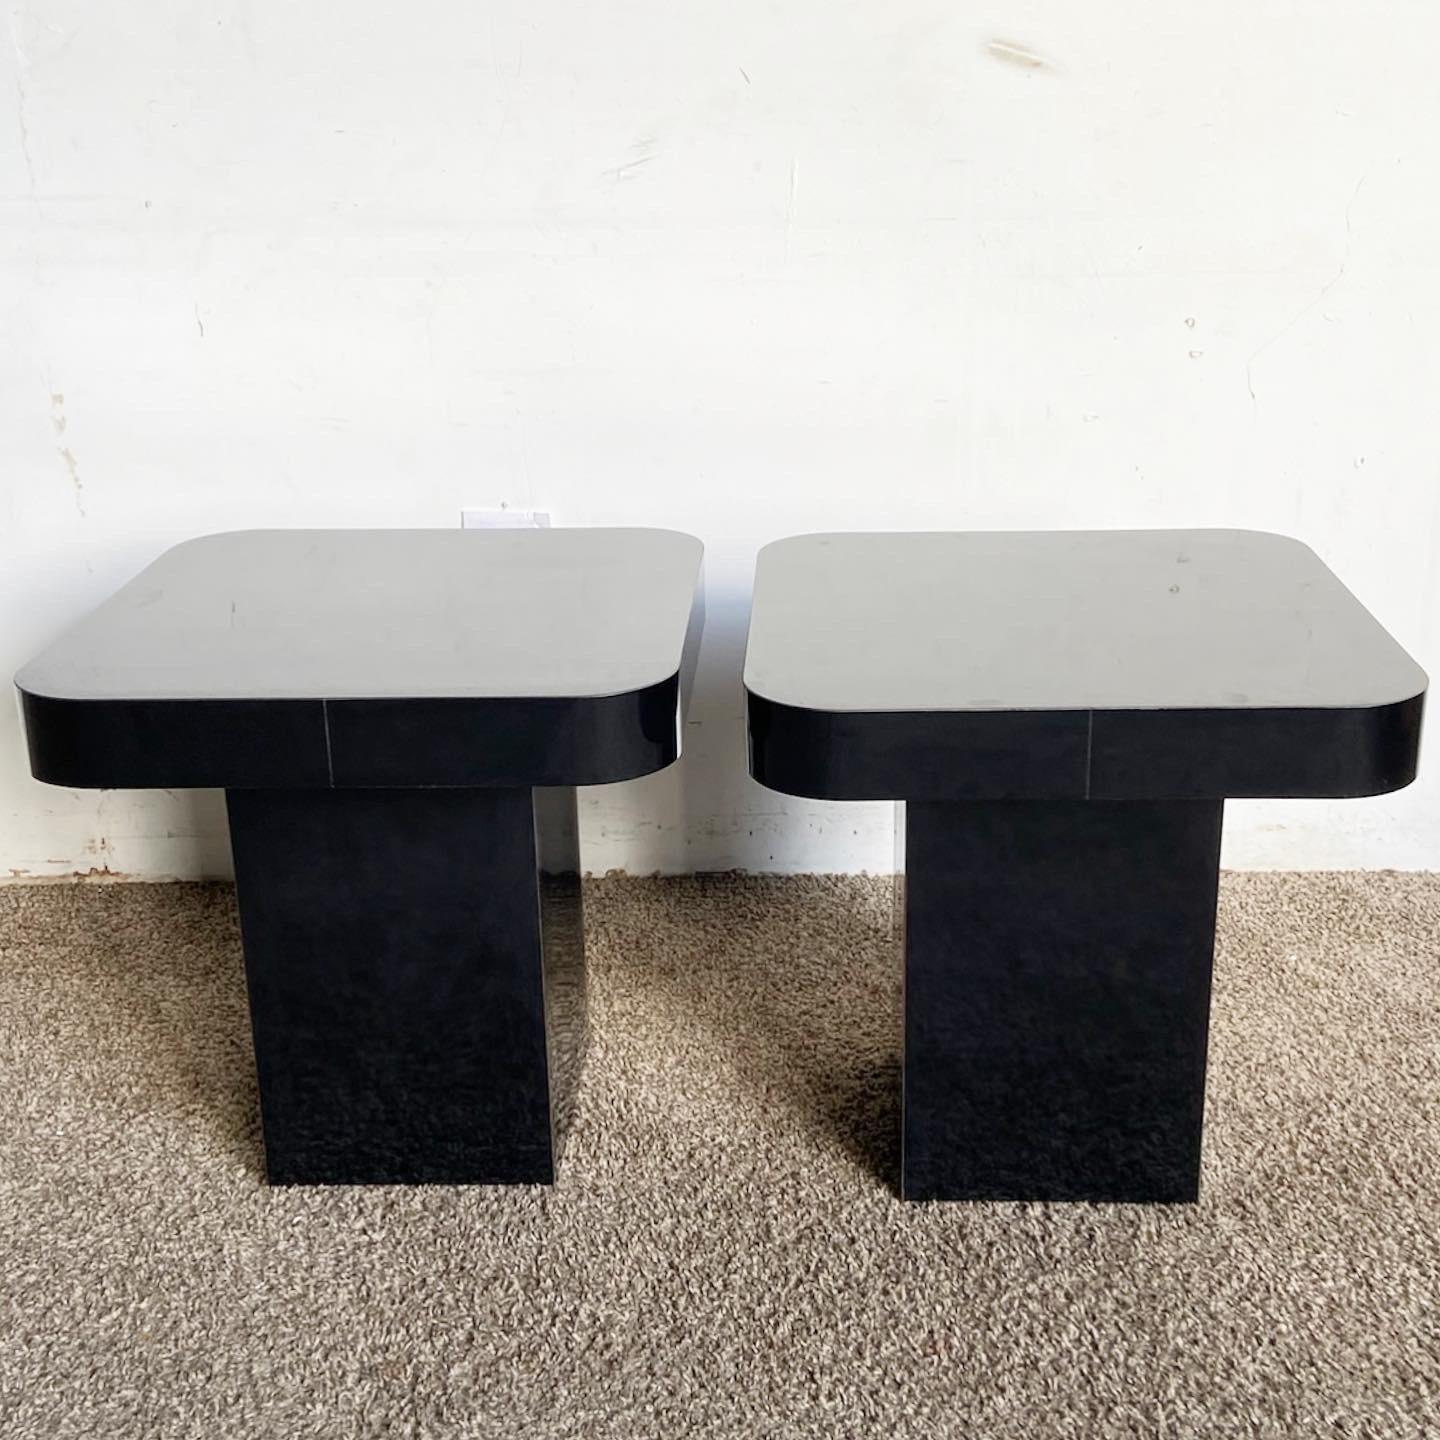 20th Century Postmodern Black Lacquer Laminate Mushroom Side Tables - a Pair For Sale